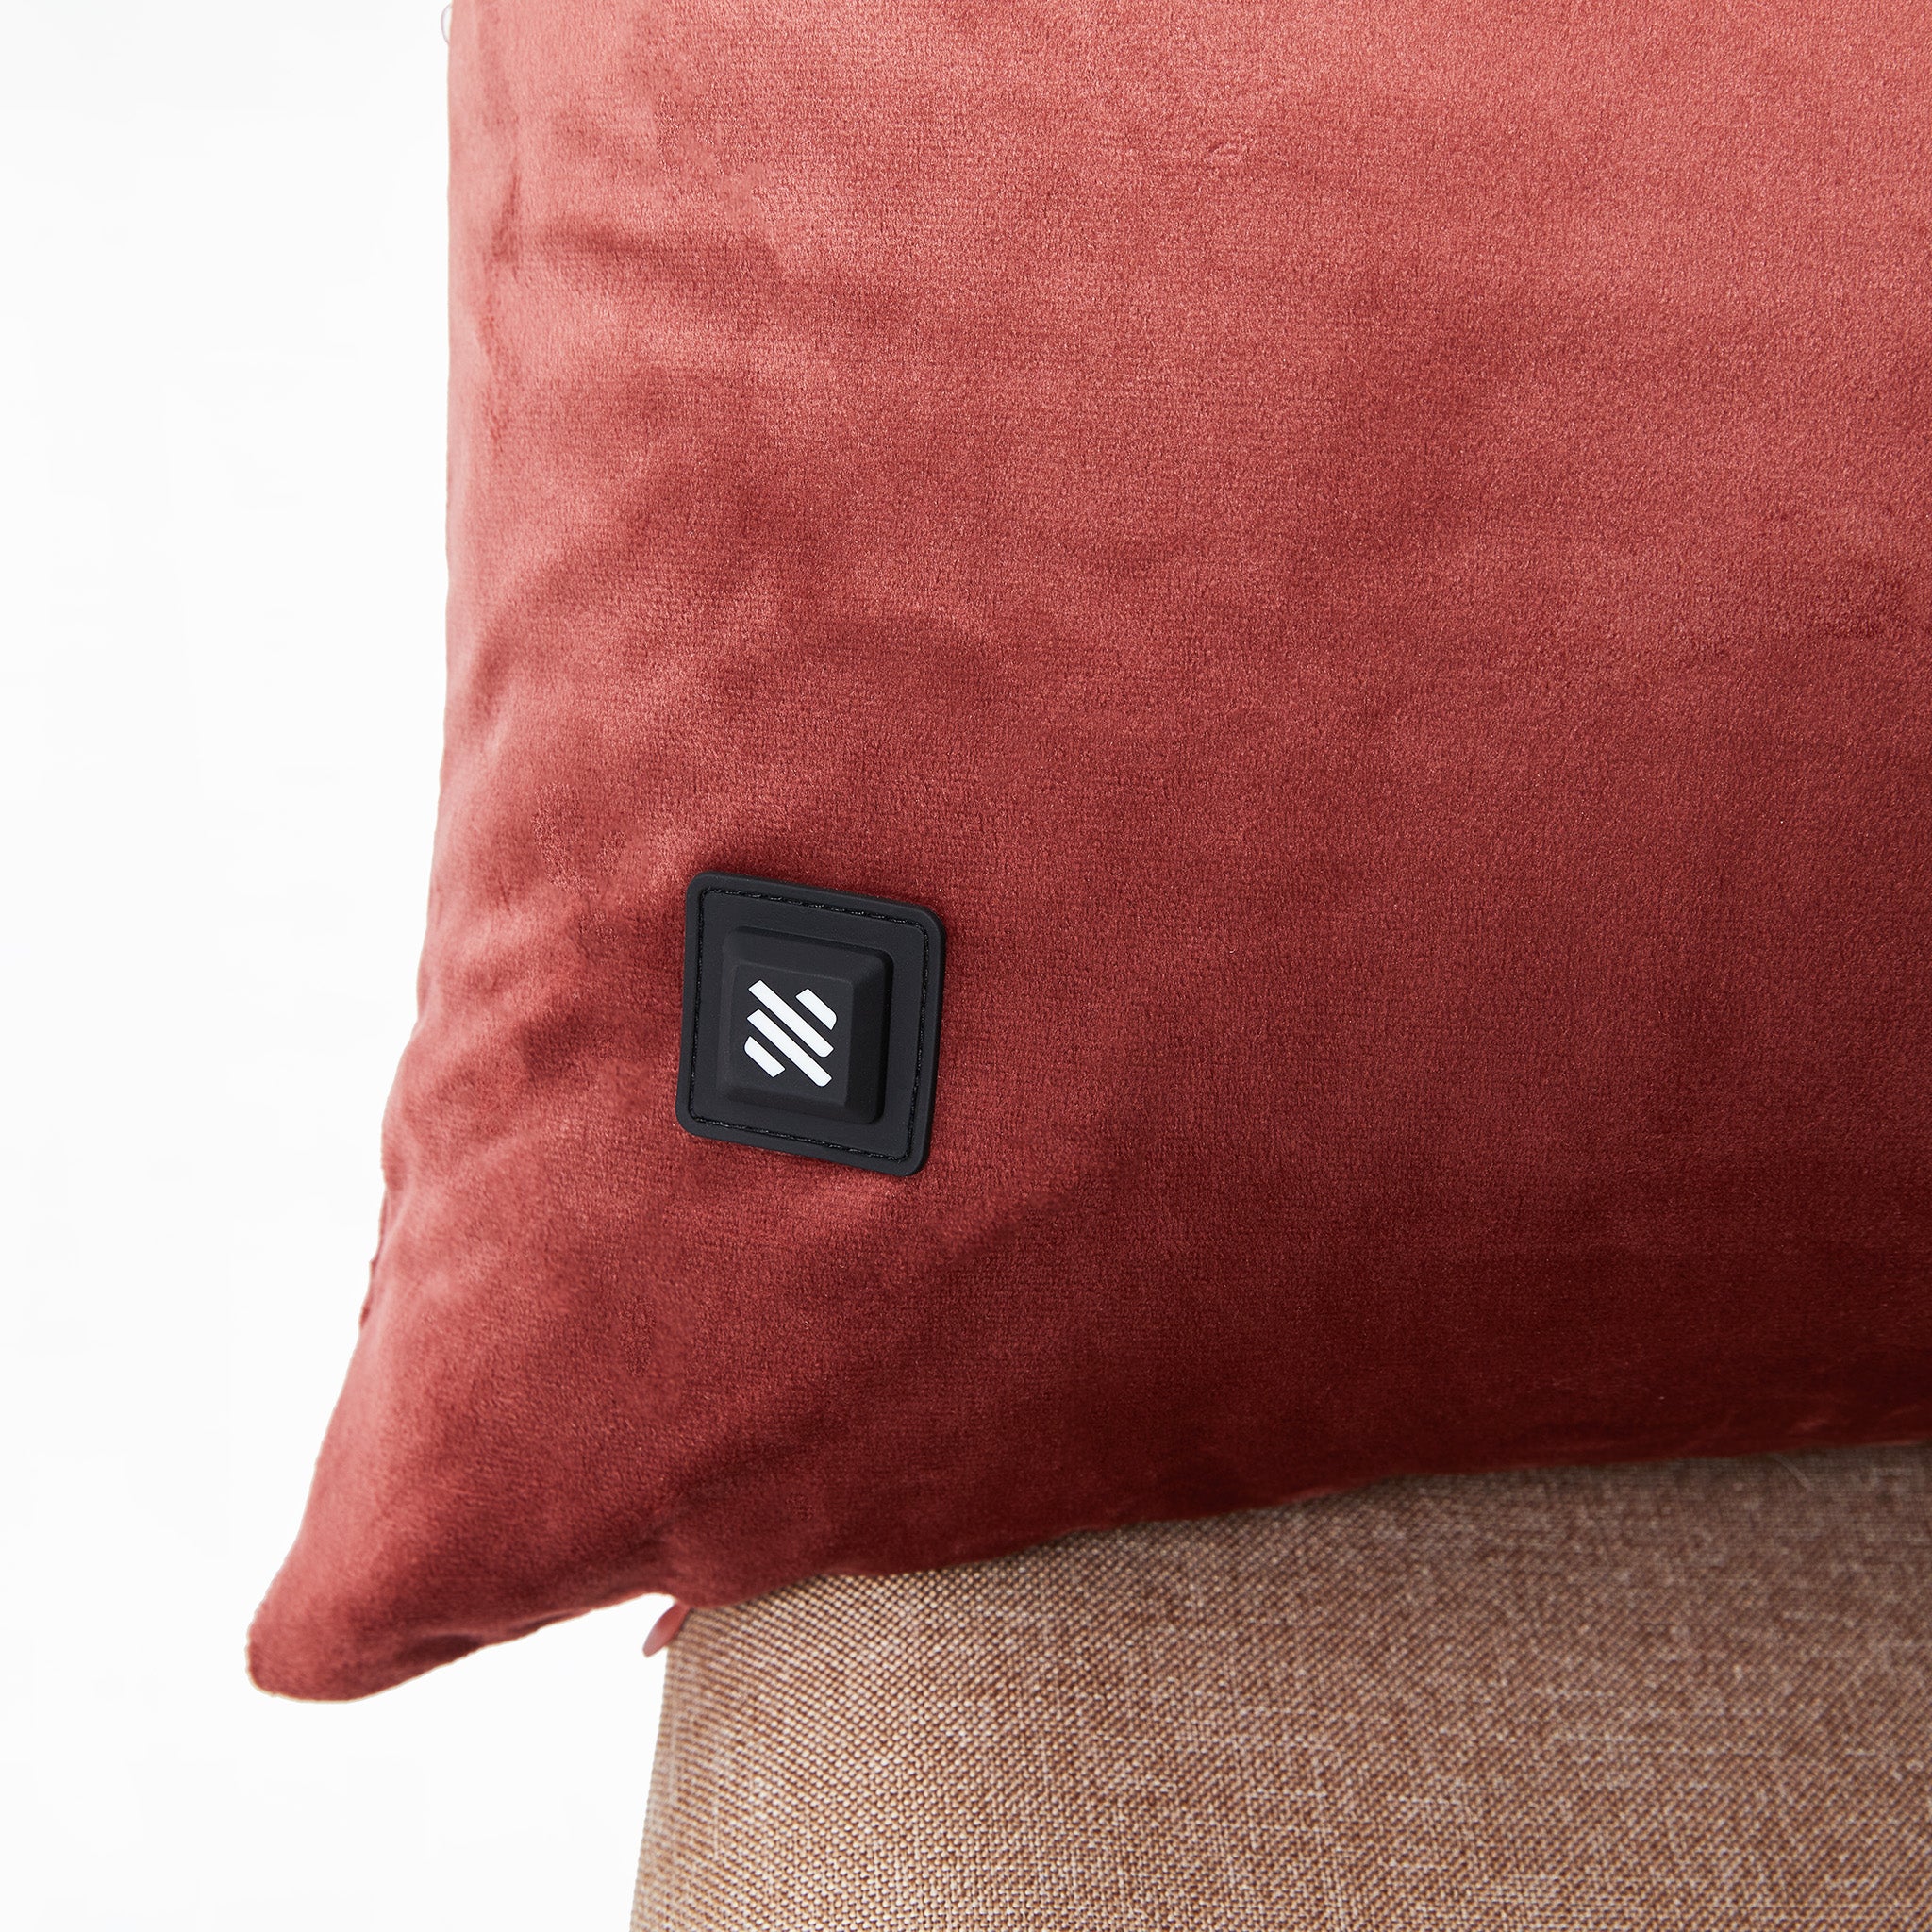 Heated  Pillow-3 levels of temperature control